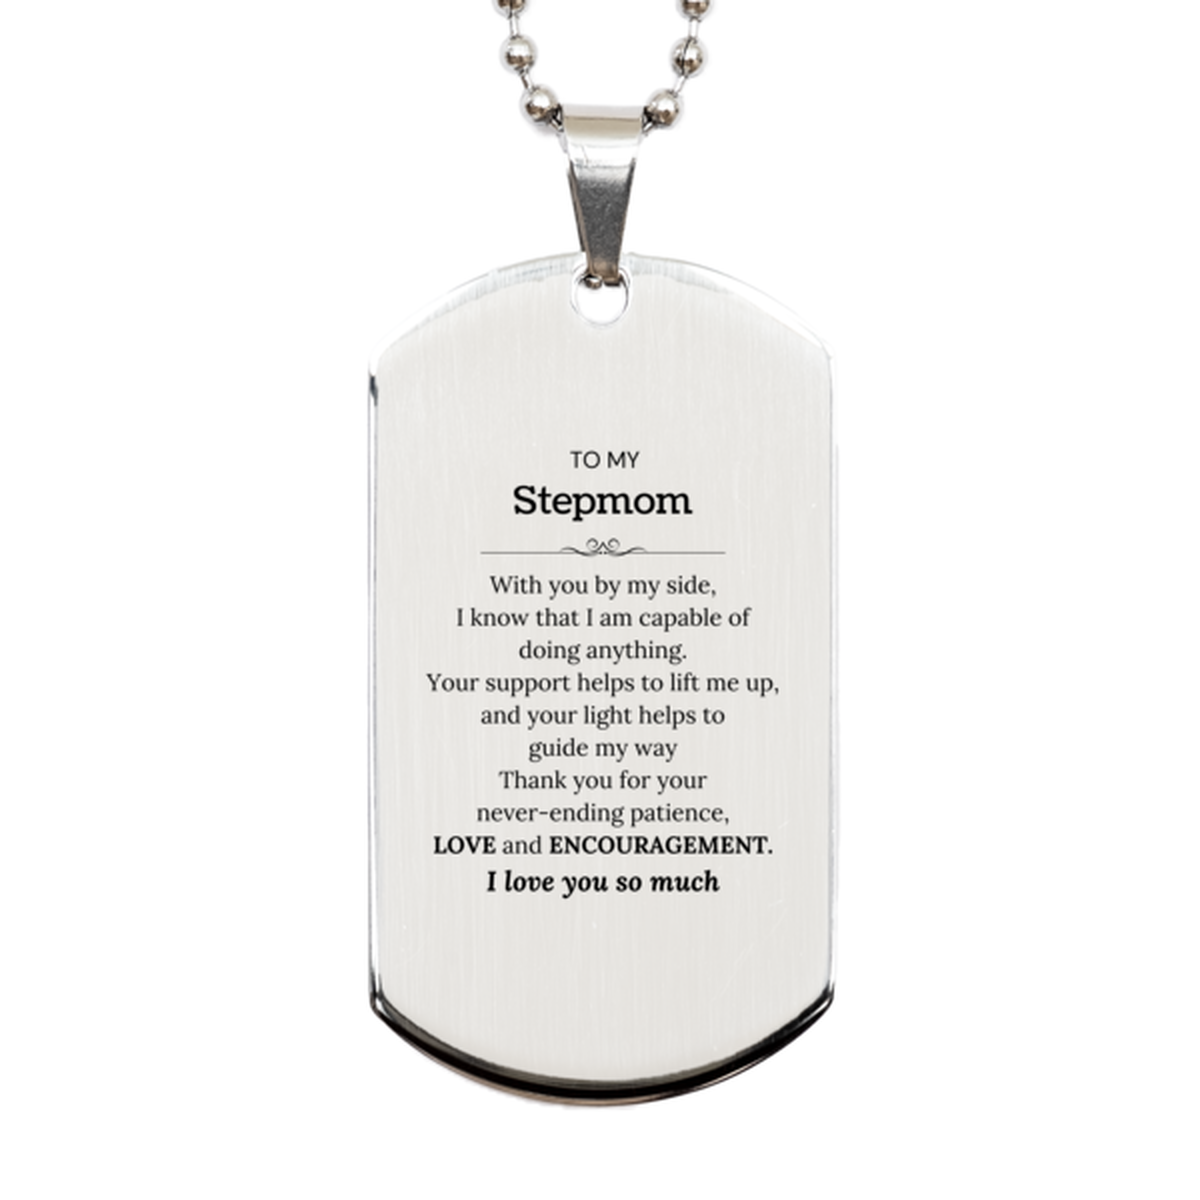 Appreciation Stepmom Silver Dog Tag Gifts, To My Stepmom Birthday Christmas Wedding Keepsake Gifts for Stepmom With you by my side, I know that I am capable of doing anything. I love you so much